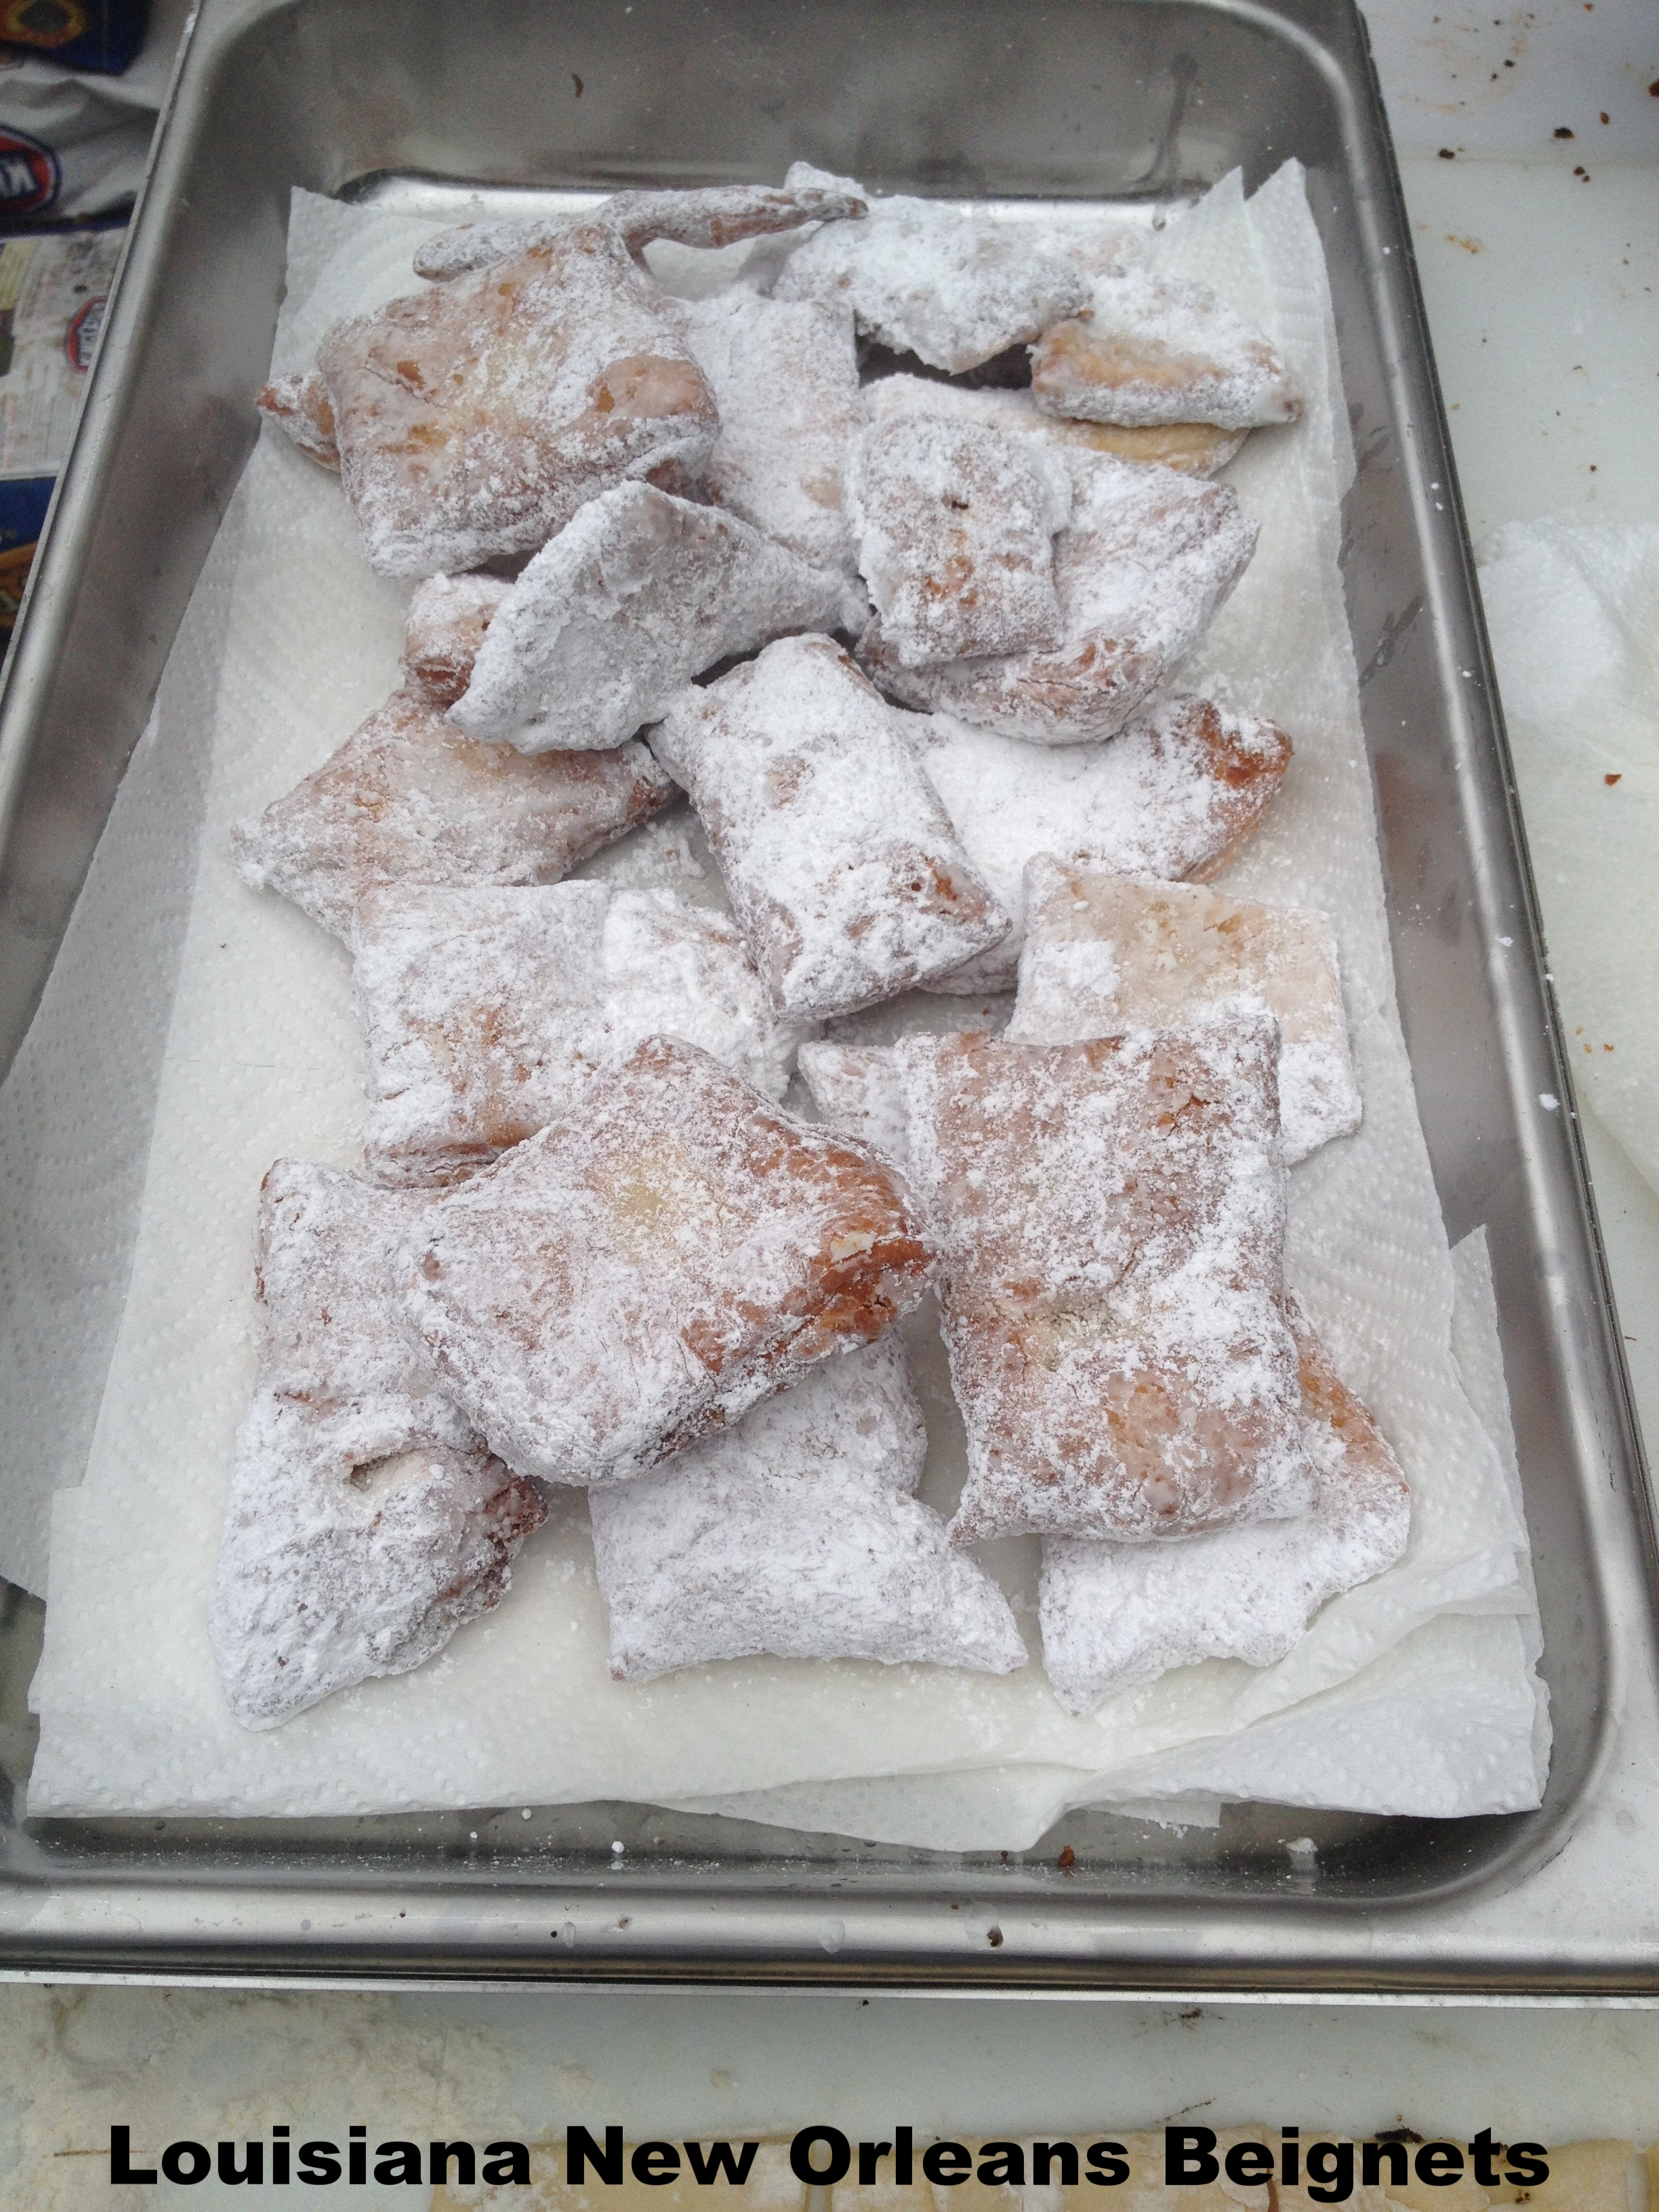 Beignets topped with powdered sugar.